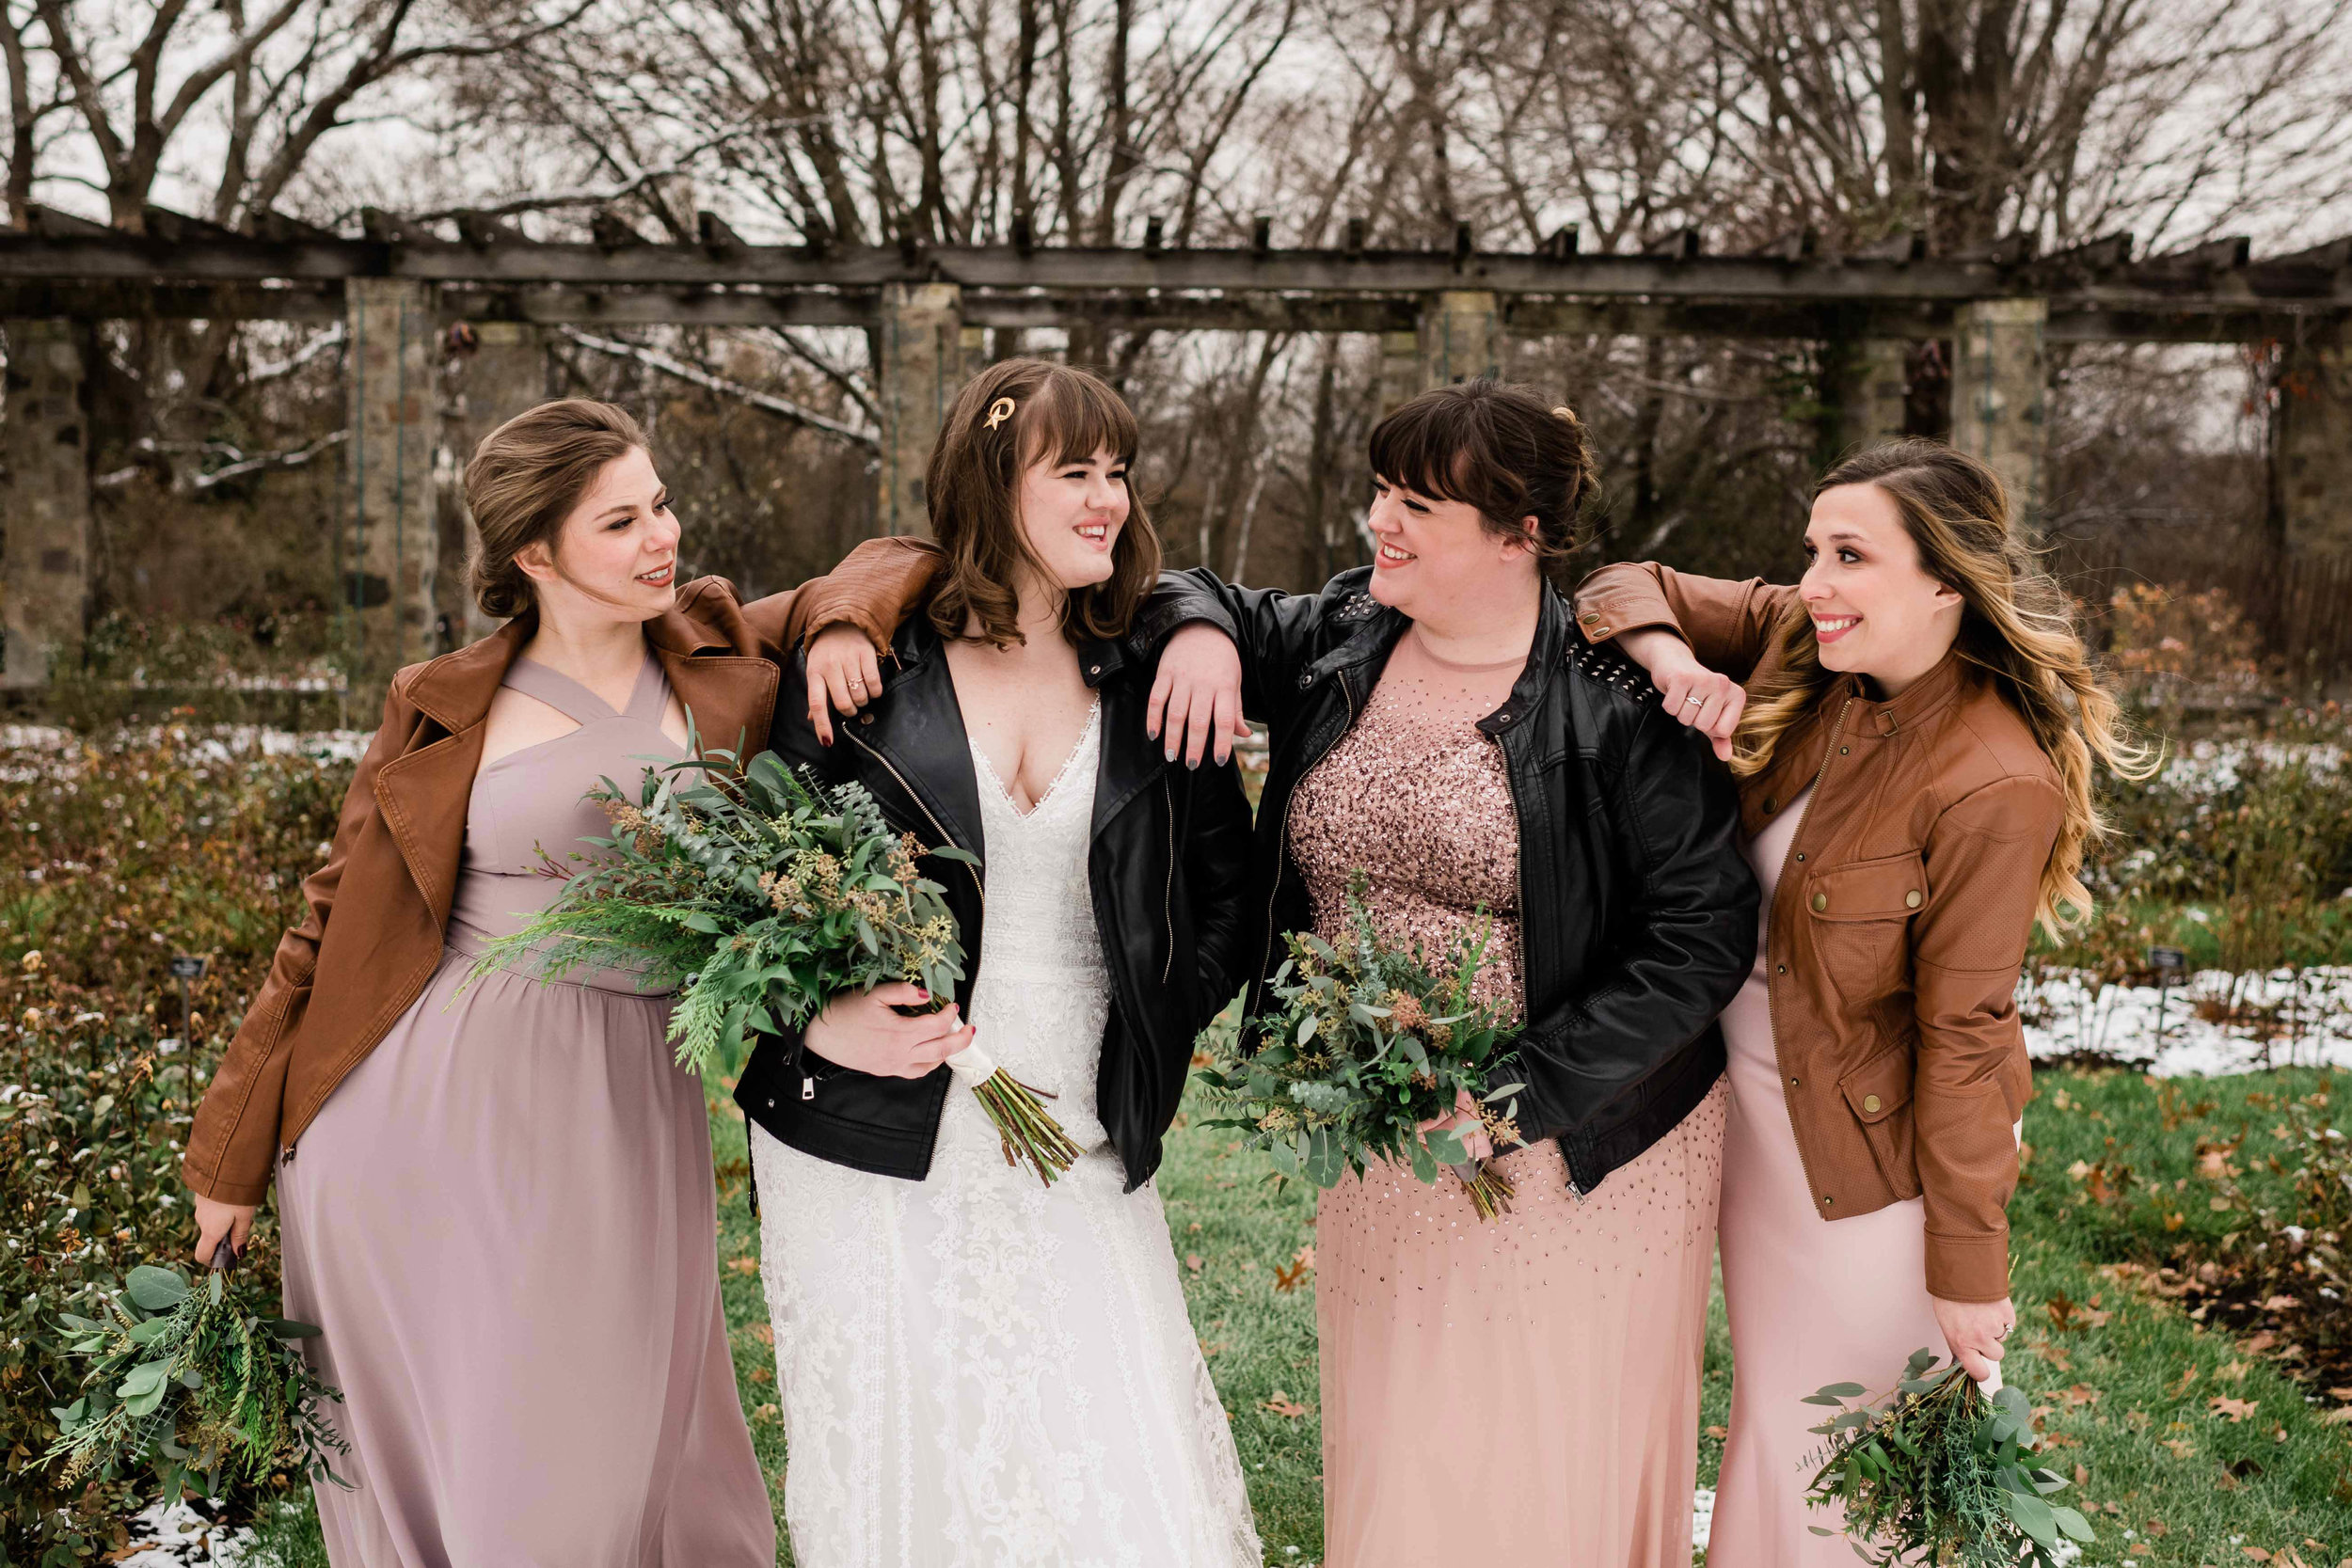 Bride and bridesmaids casually laughing with each other